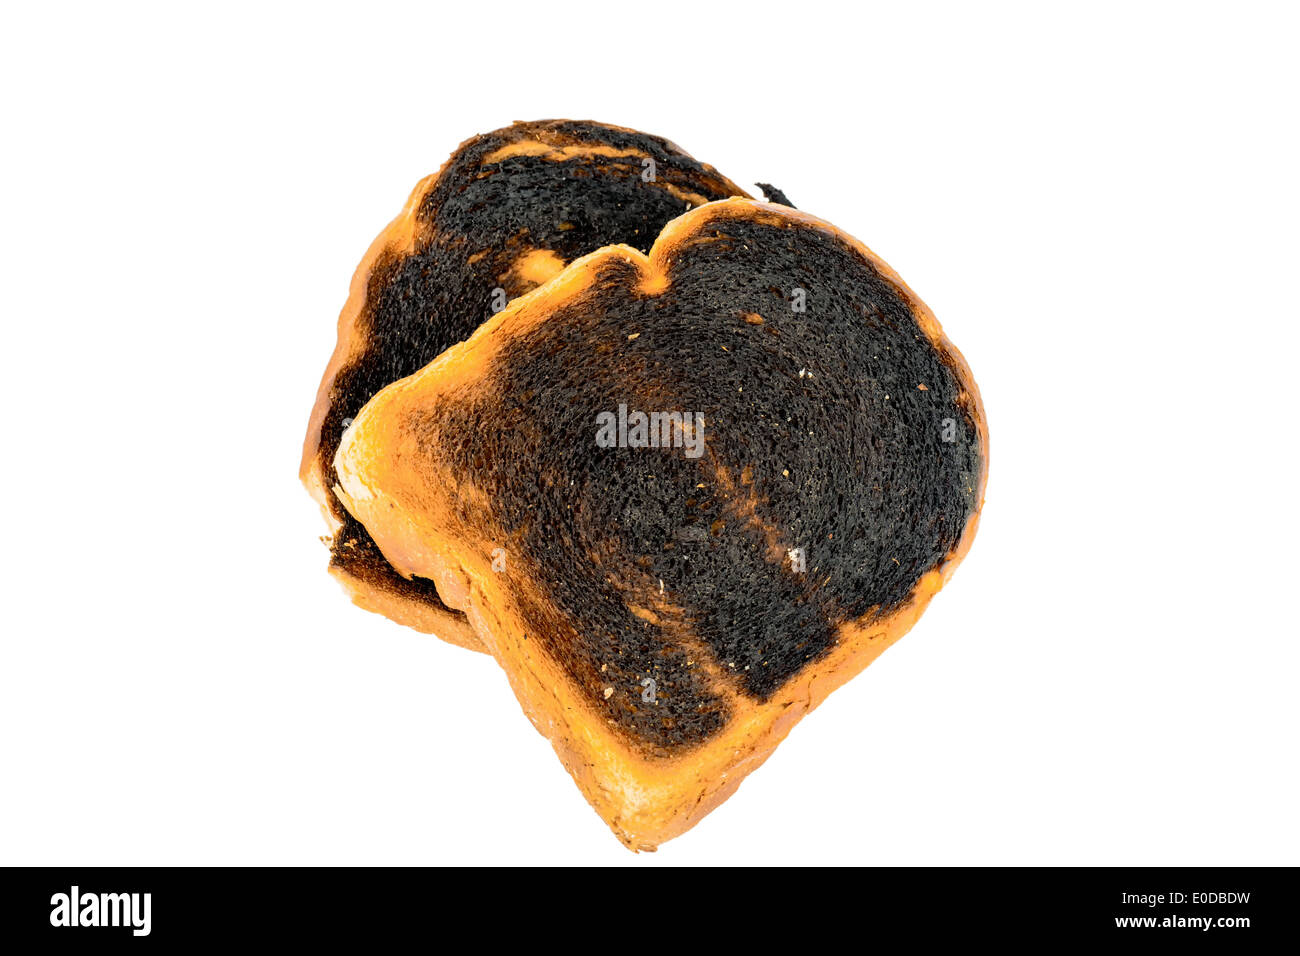 Toast bread became burntly. Burntly toast discs with the breakfast., Toastbrot wurde beim toasten verbrannt. Stock Photo